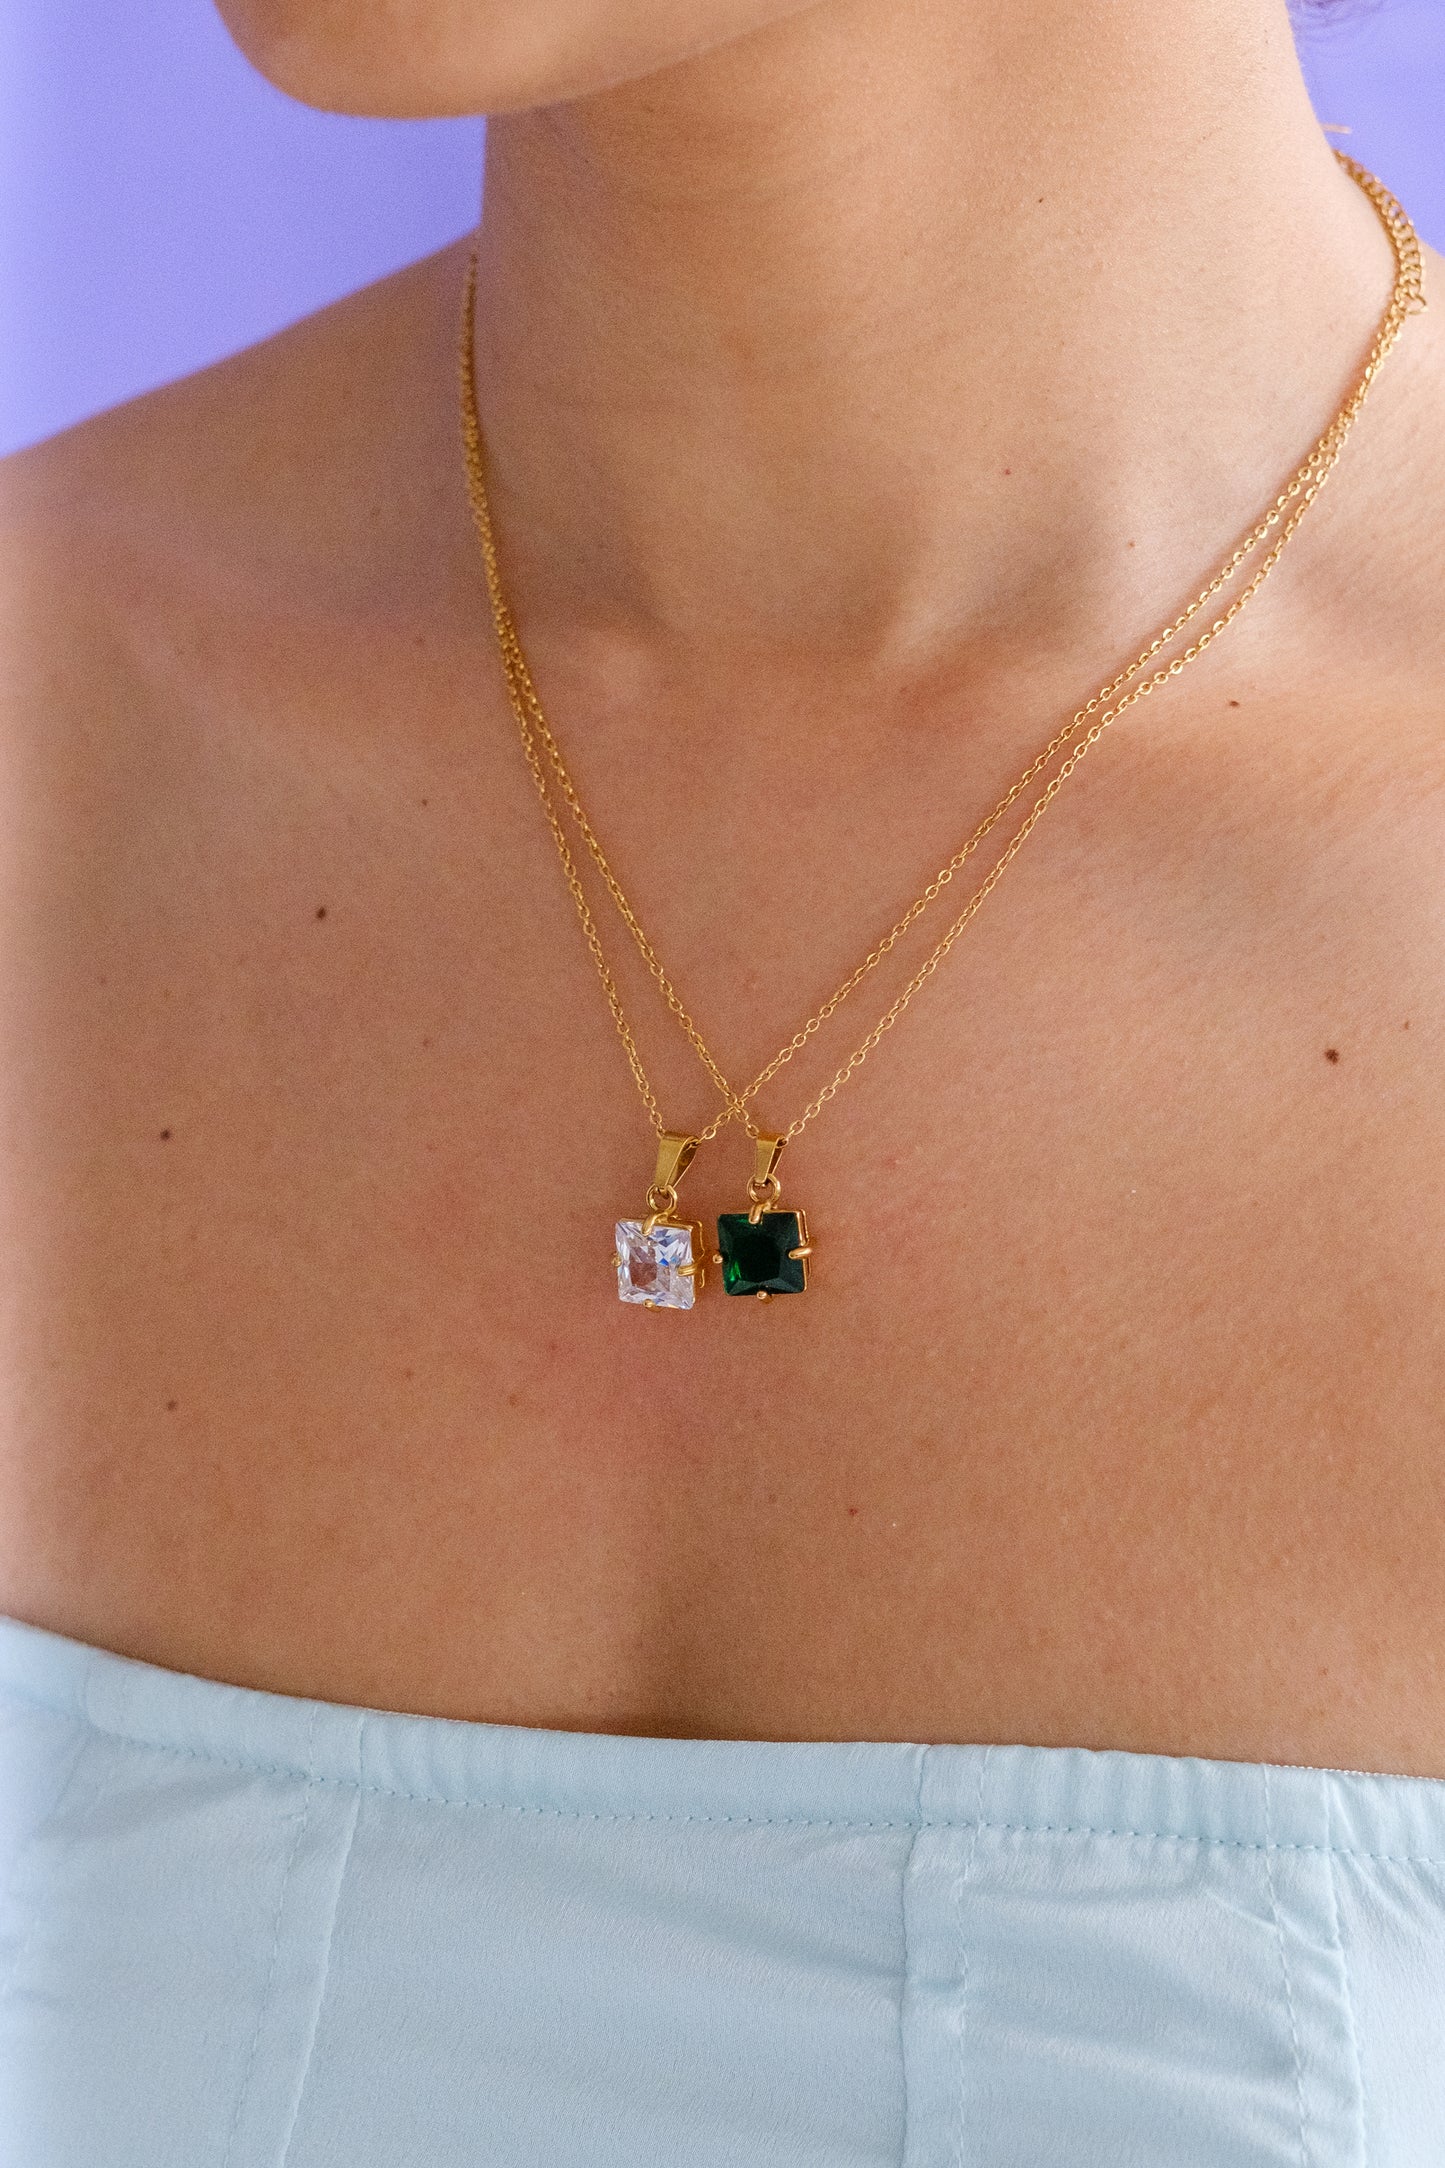 Woman wearing two matching gold necklaces. Both with square pendant crystals; one with a green gem and the other with a clear gem